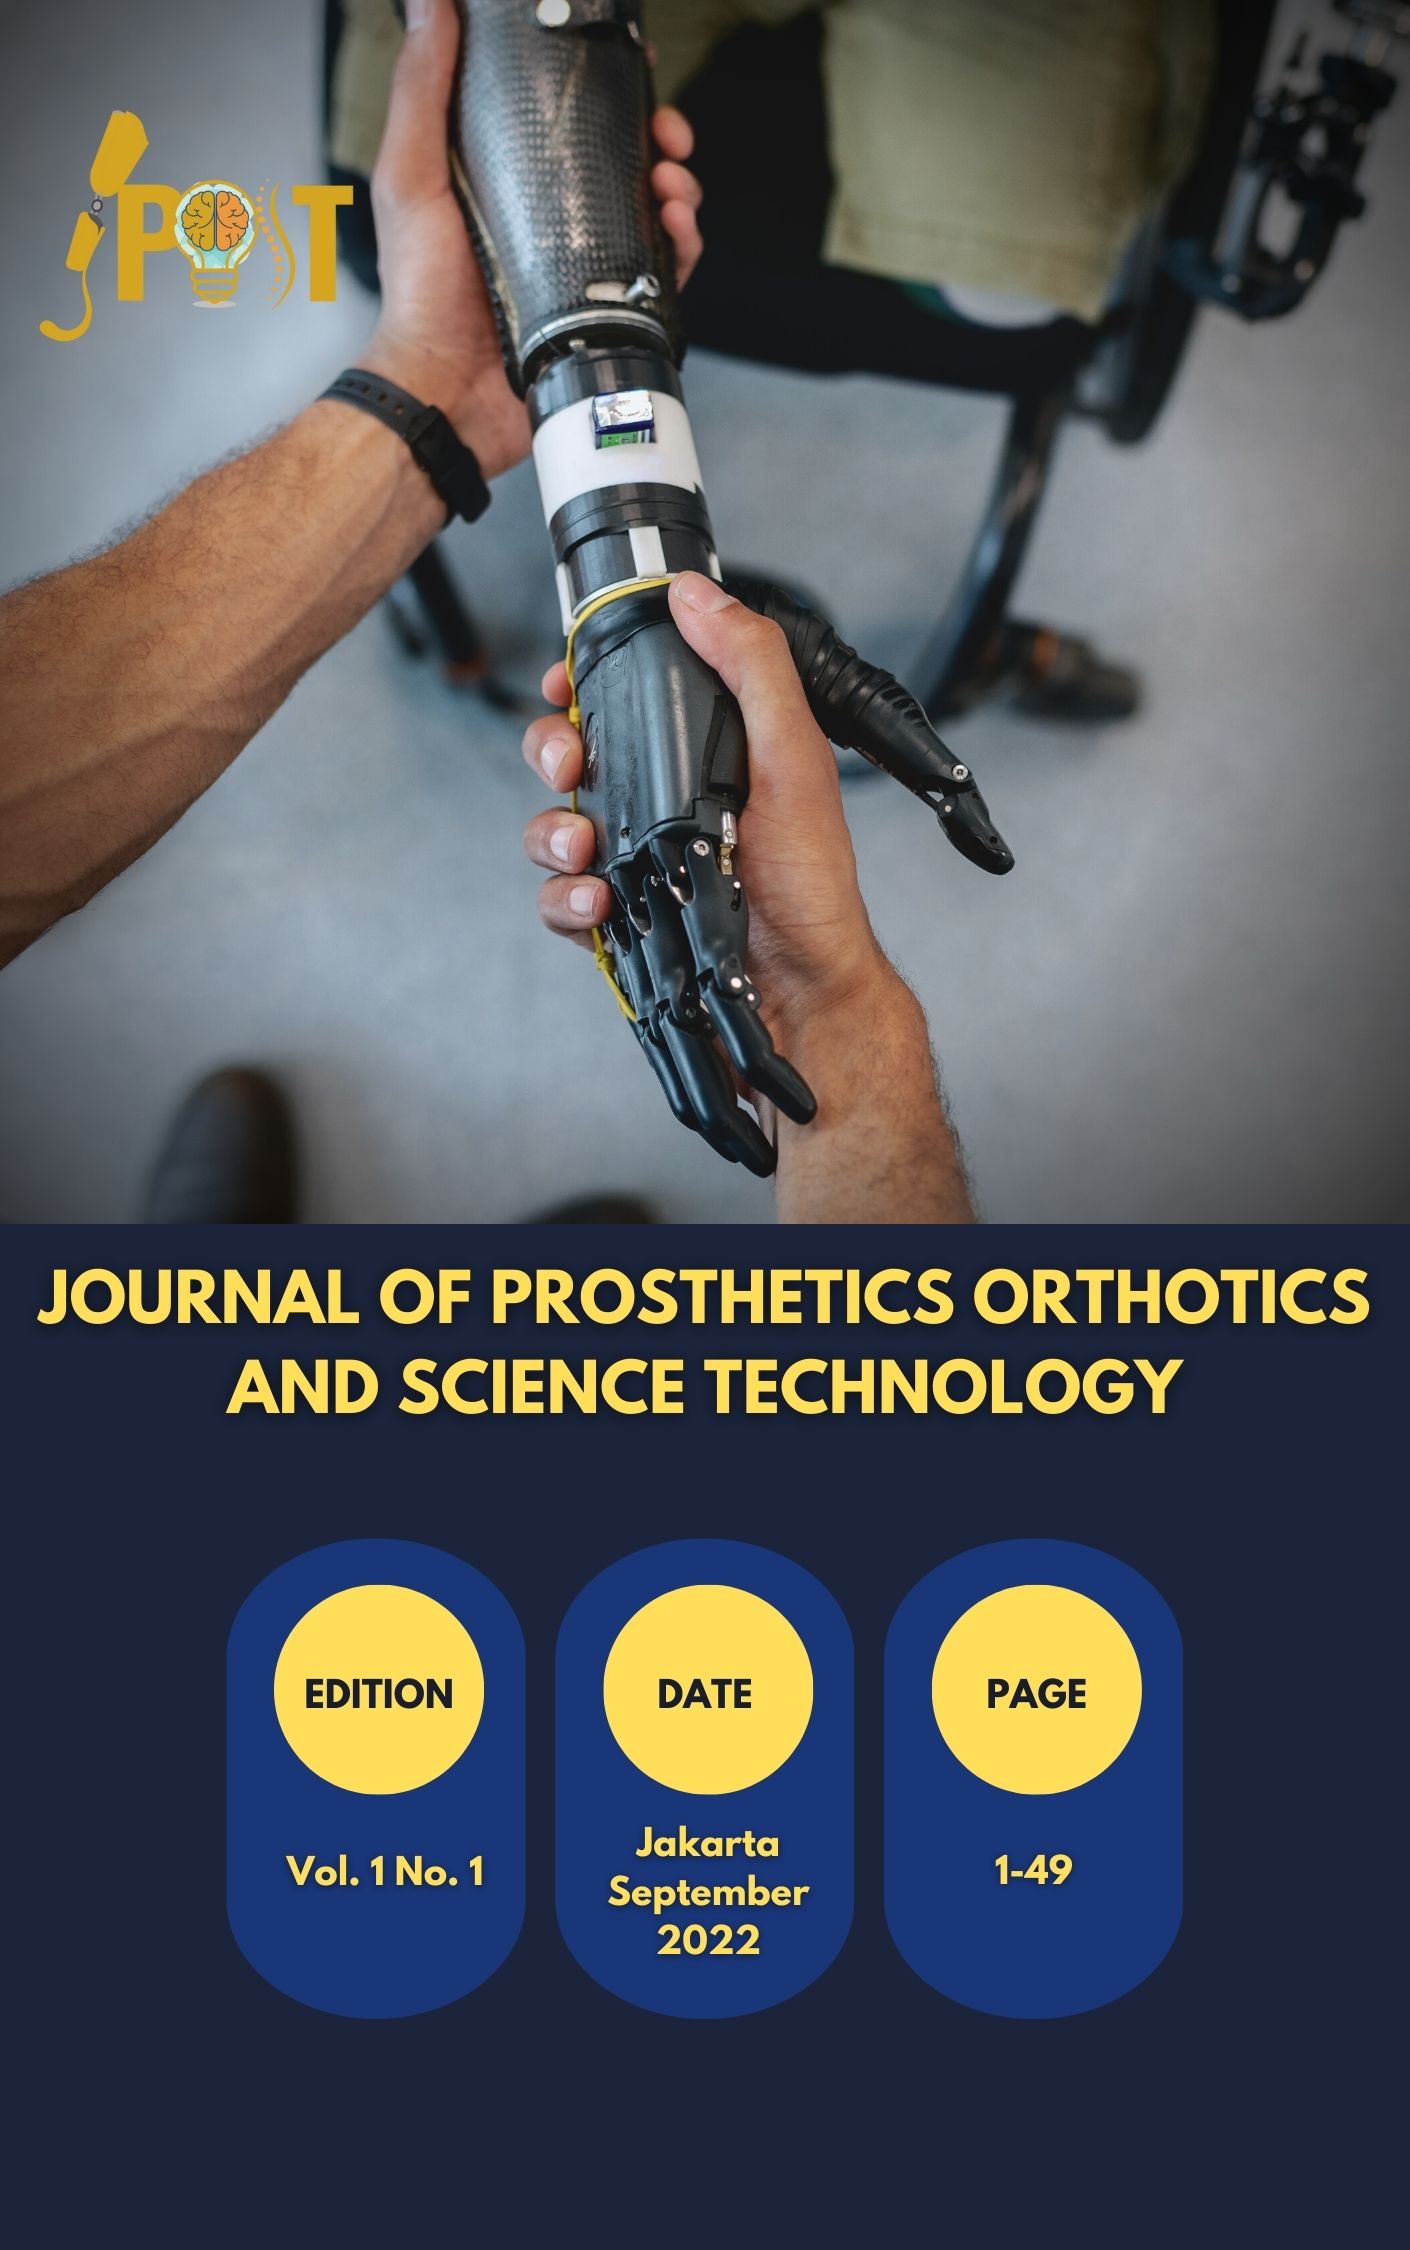 					View Vol. 1 No. 1 (2022): JPOST: JOURNAL OF PROSTHETICS ORTHOTICS AND SCIENCE TECHNOLOGY
				